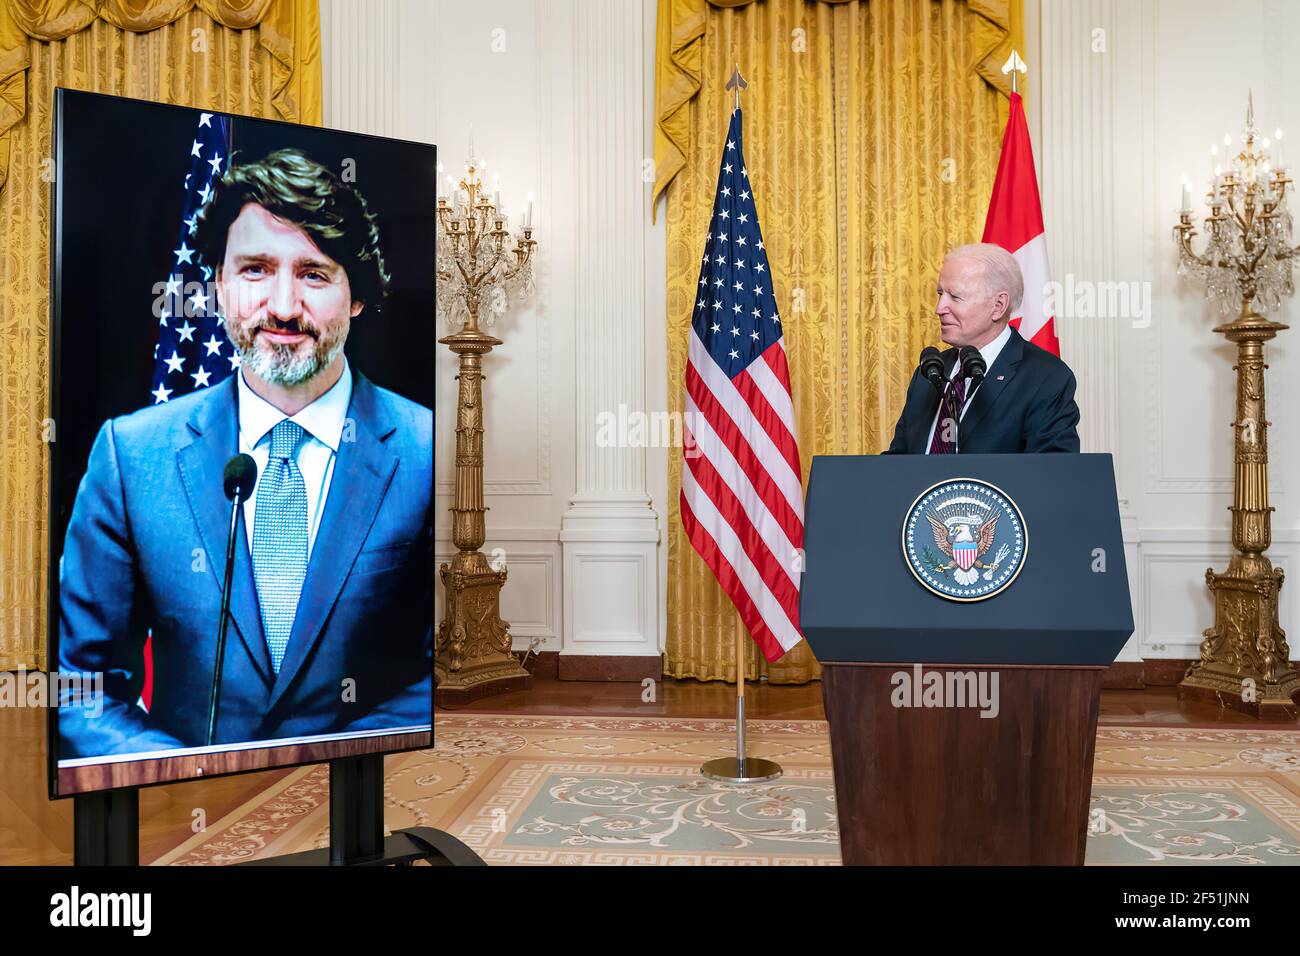 President Joe Biden delivers a virtual joint press statement with Canadian Prime Minister Justin Trudeau Tuesday, Feb. 23, 2021, in the East Room of the White House. (Official White House Photo by Adam Schultz) Stock Photo